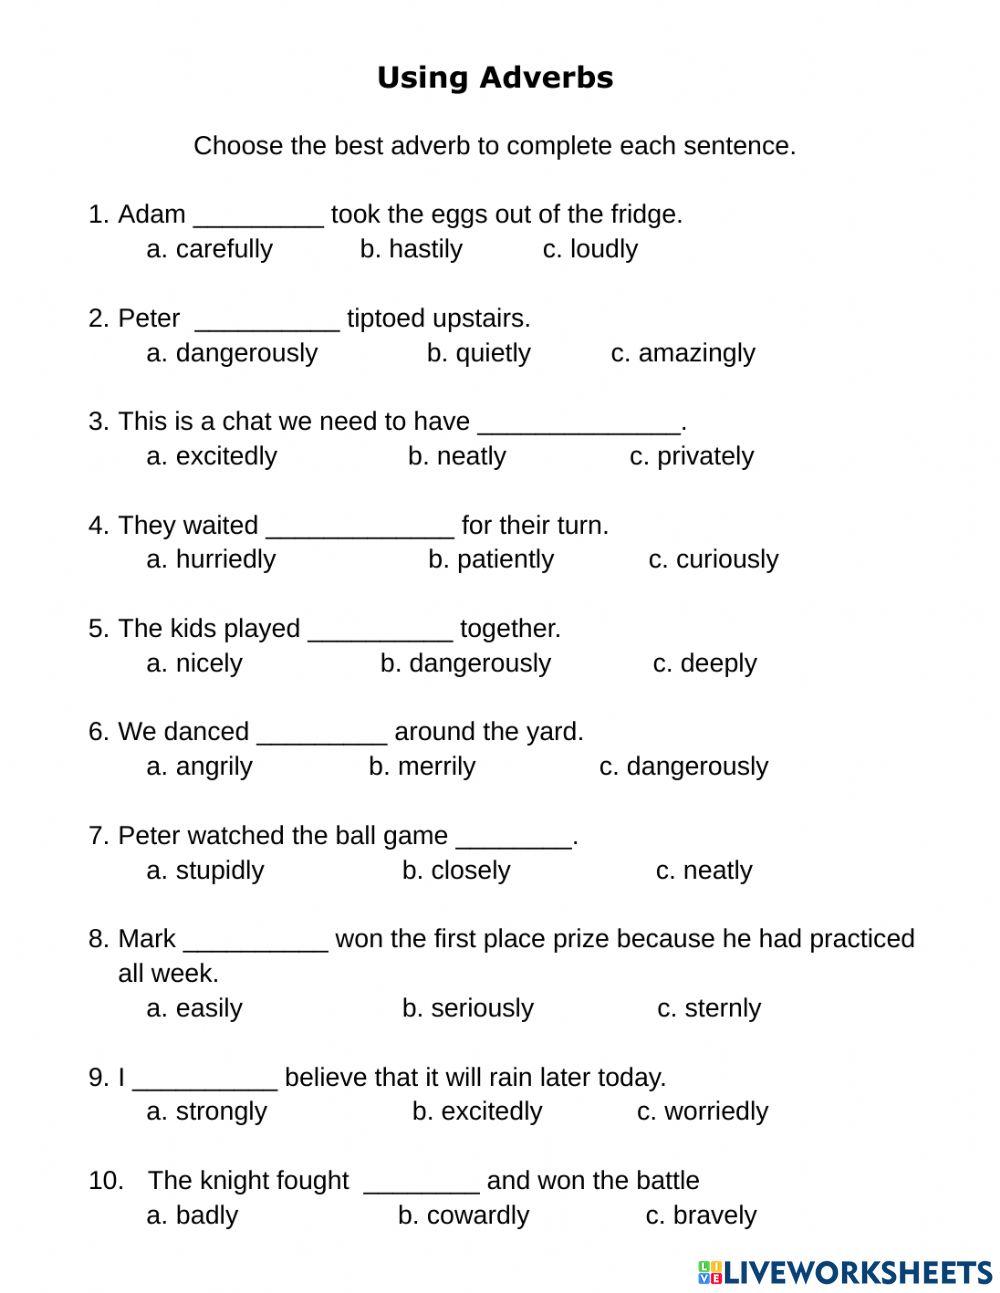 Using Adverbs (How)